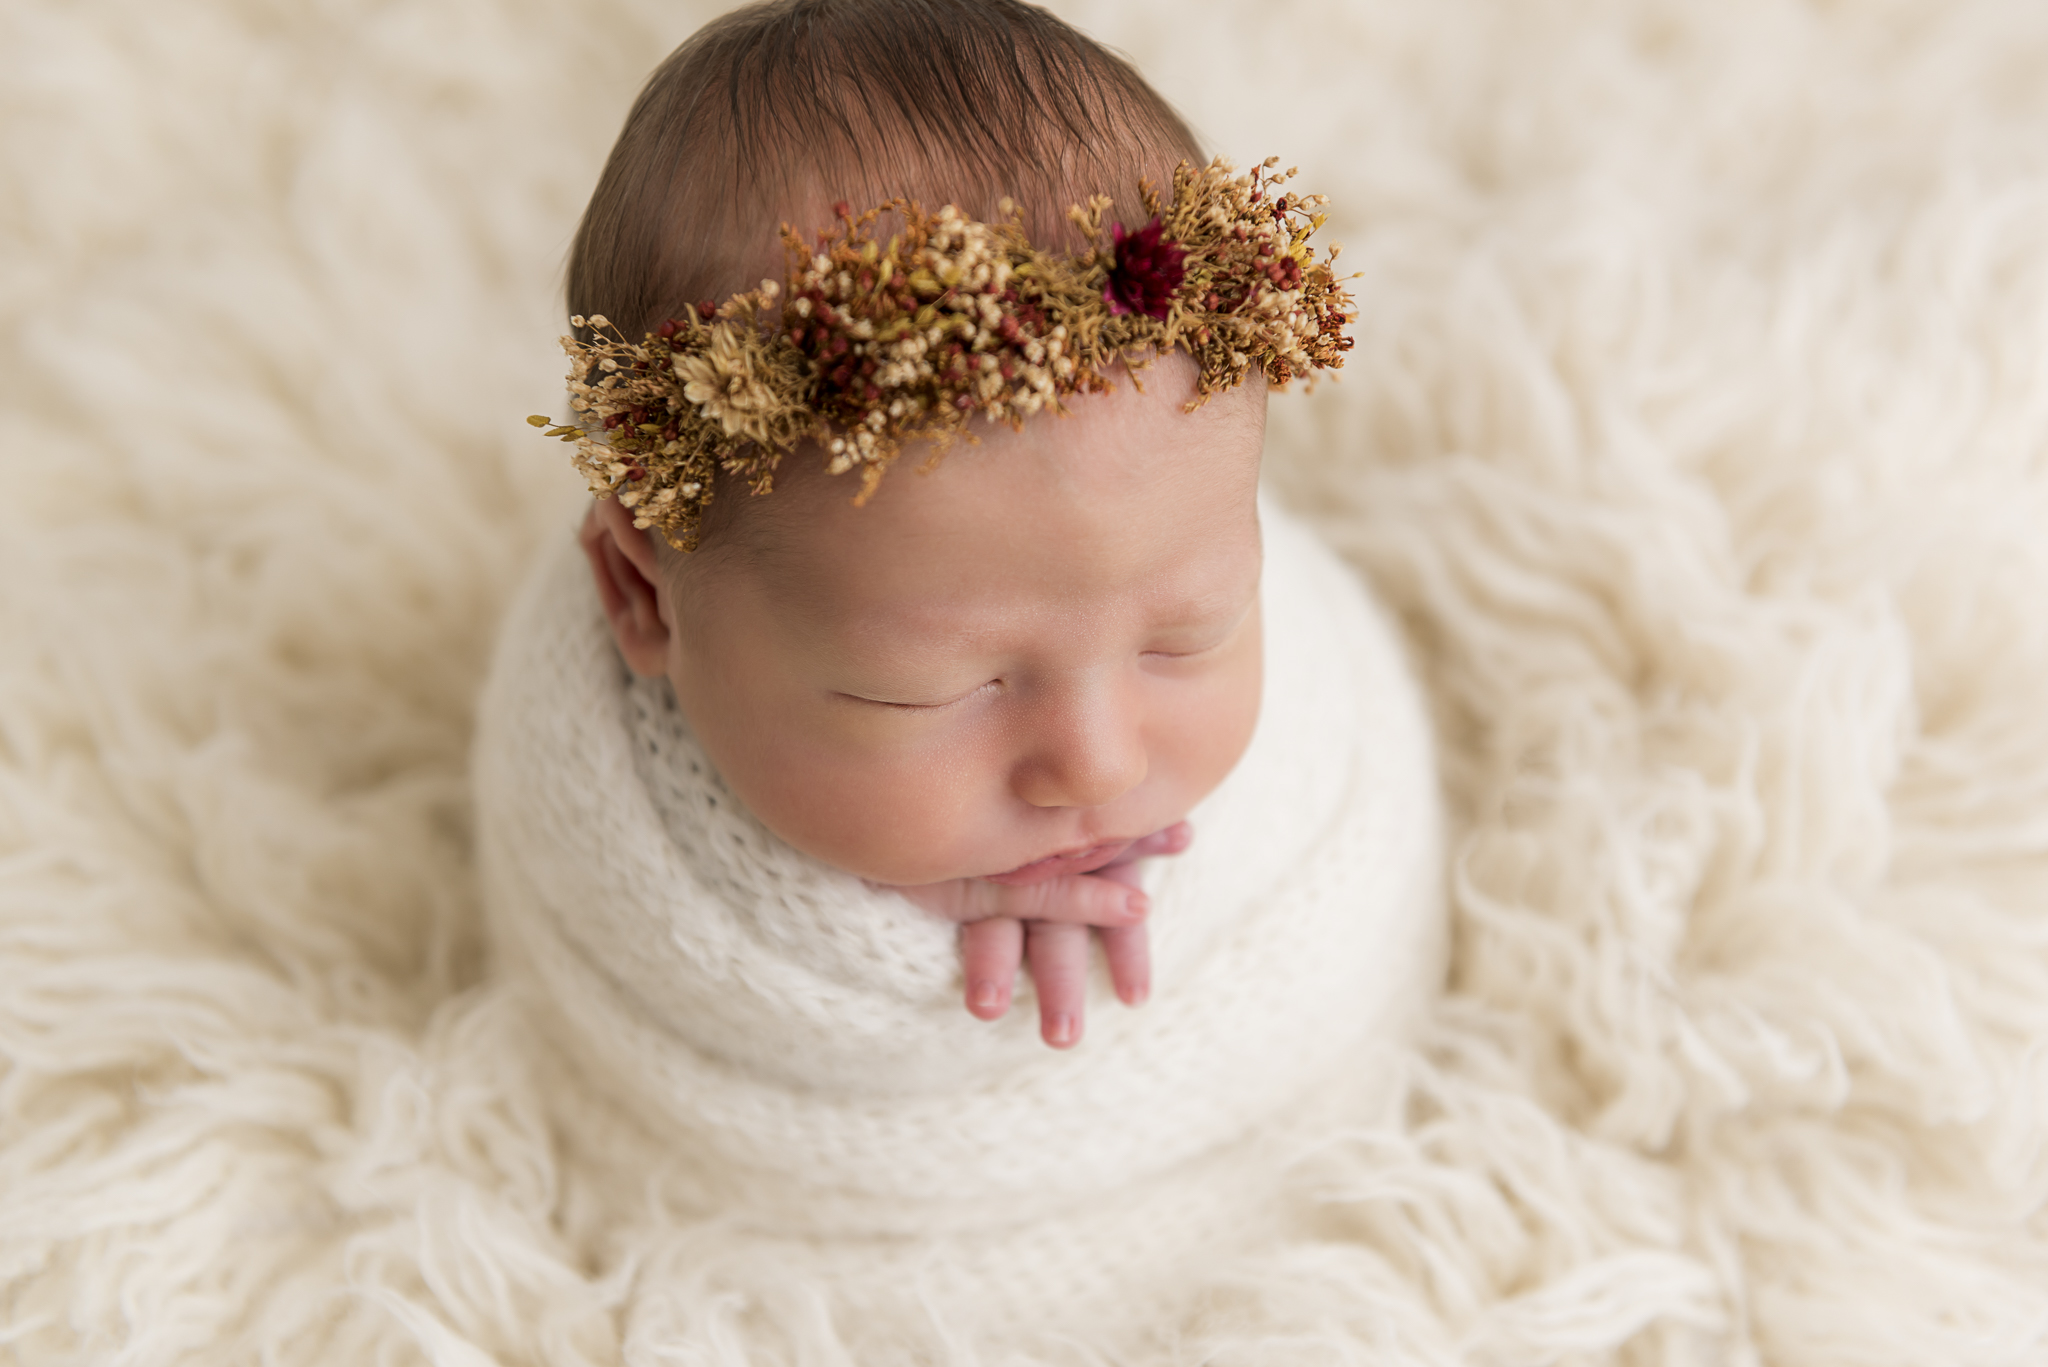 Swaddled newborn photography in Fall floral halo